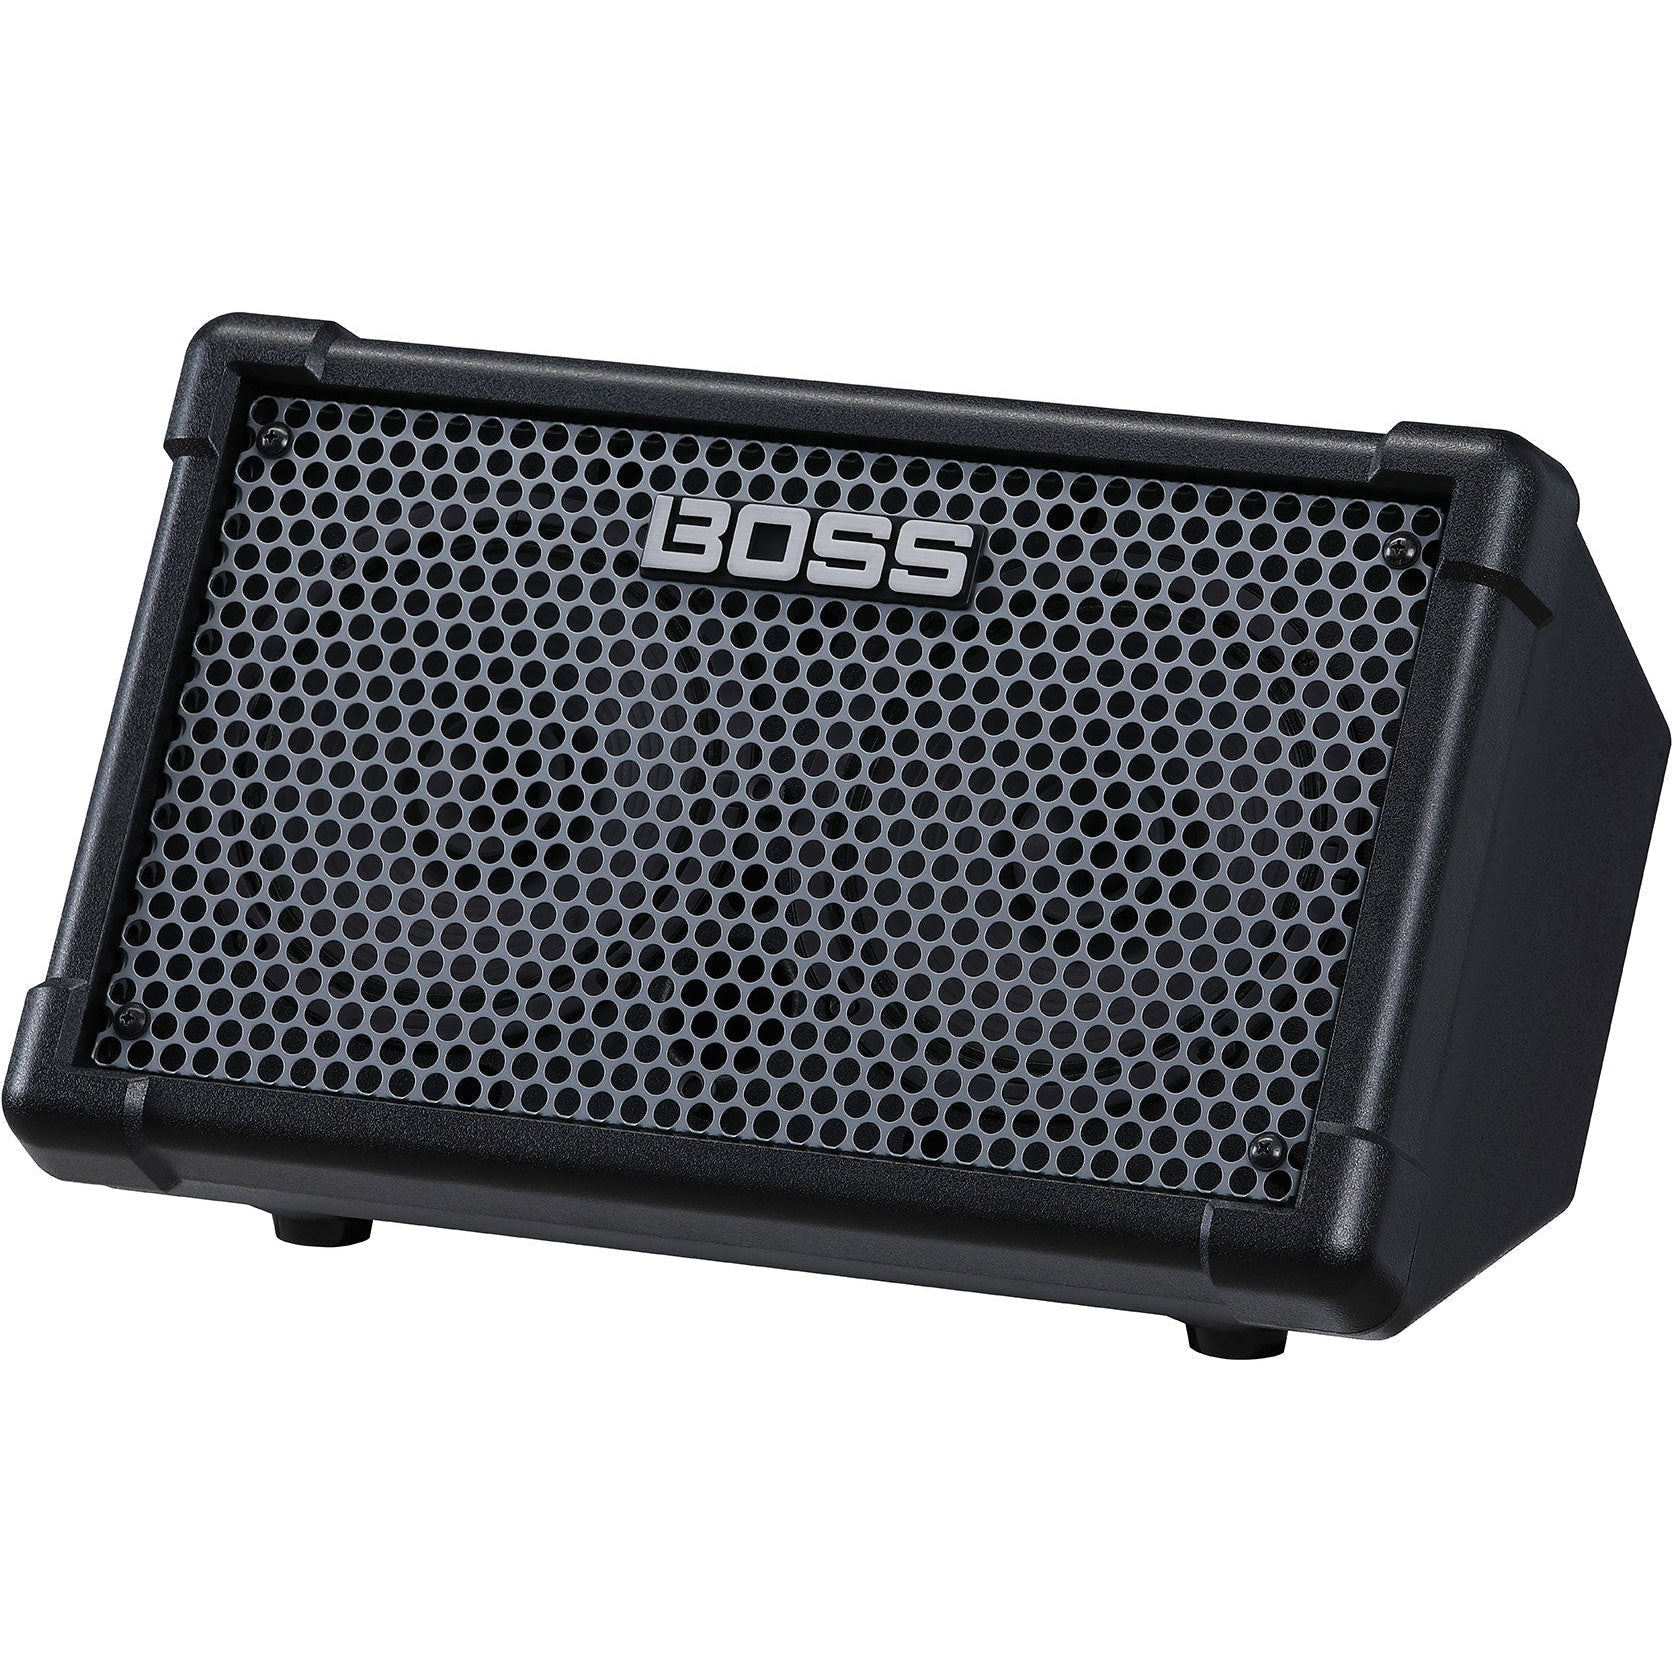 Boss CUBE-ST2 Cube Street II Battery-Powered Stereo Amplifier with 2 x 6.5" Speakers-10 Watts, Black-Music World Academy